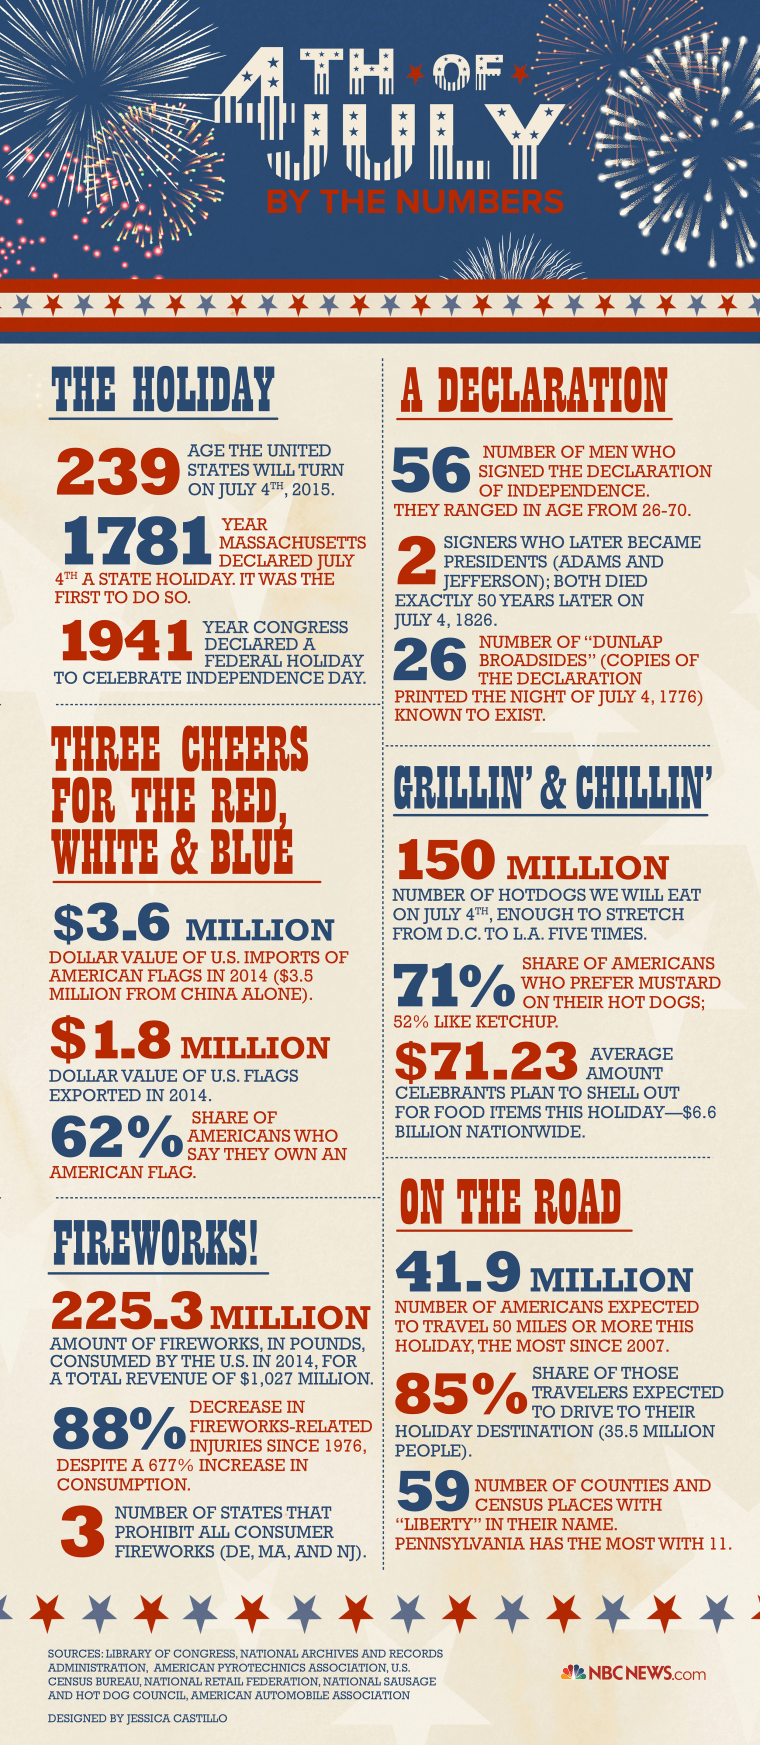 July Fourth by the numbers